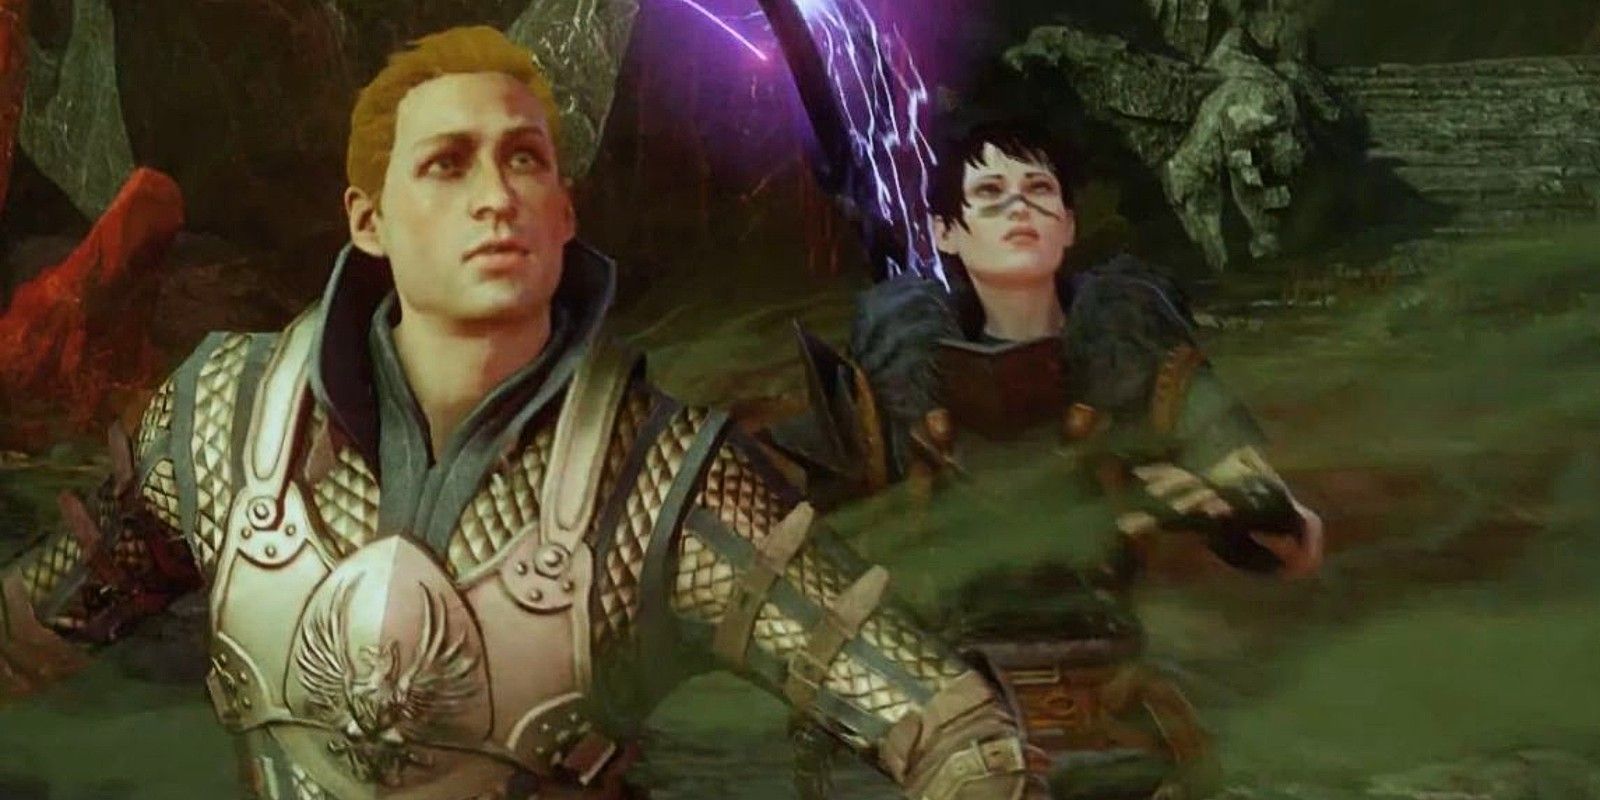 Alistair and female Hawke in the Fade during Here Lies the Abyss in Dragon Age: Inquisition